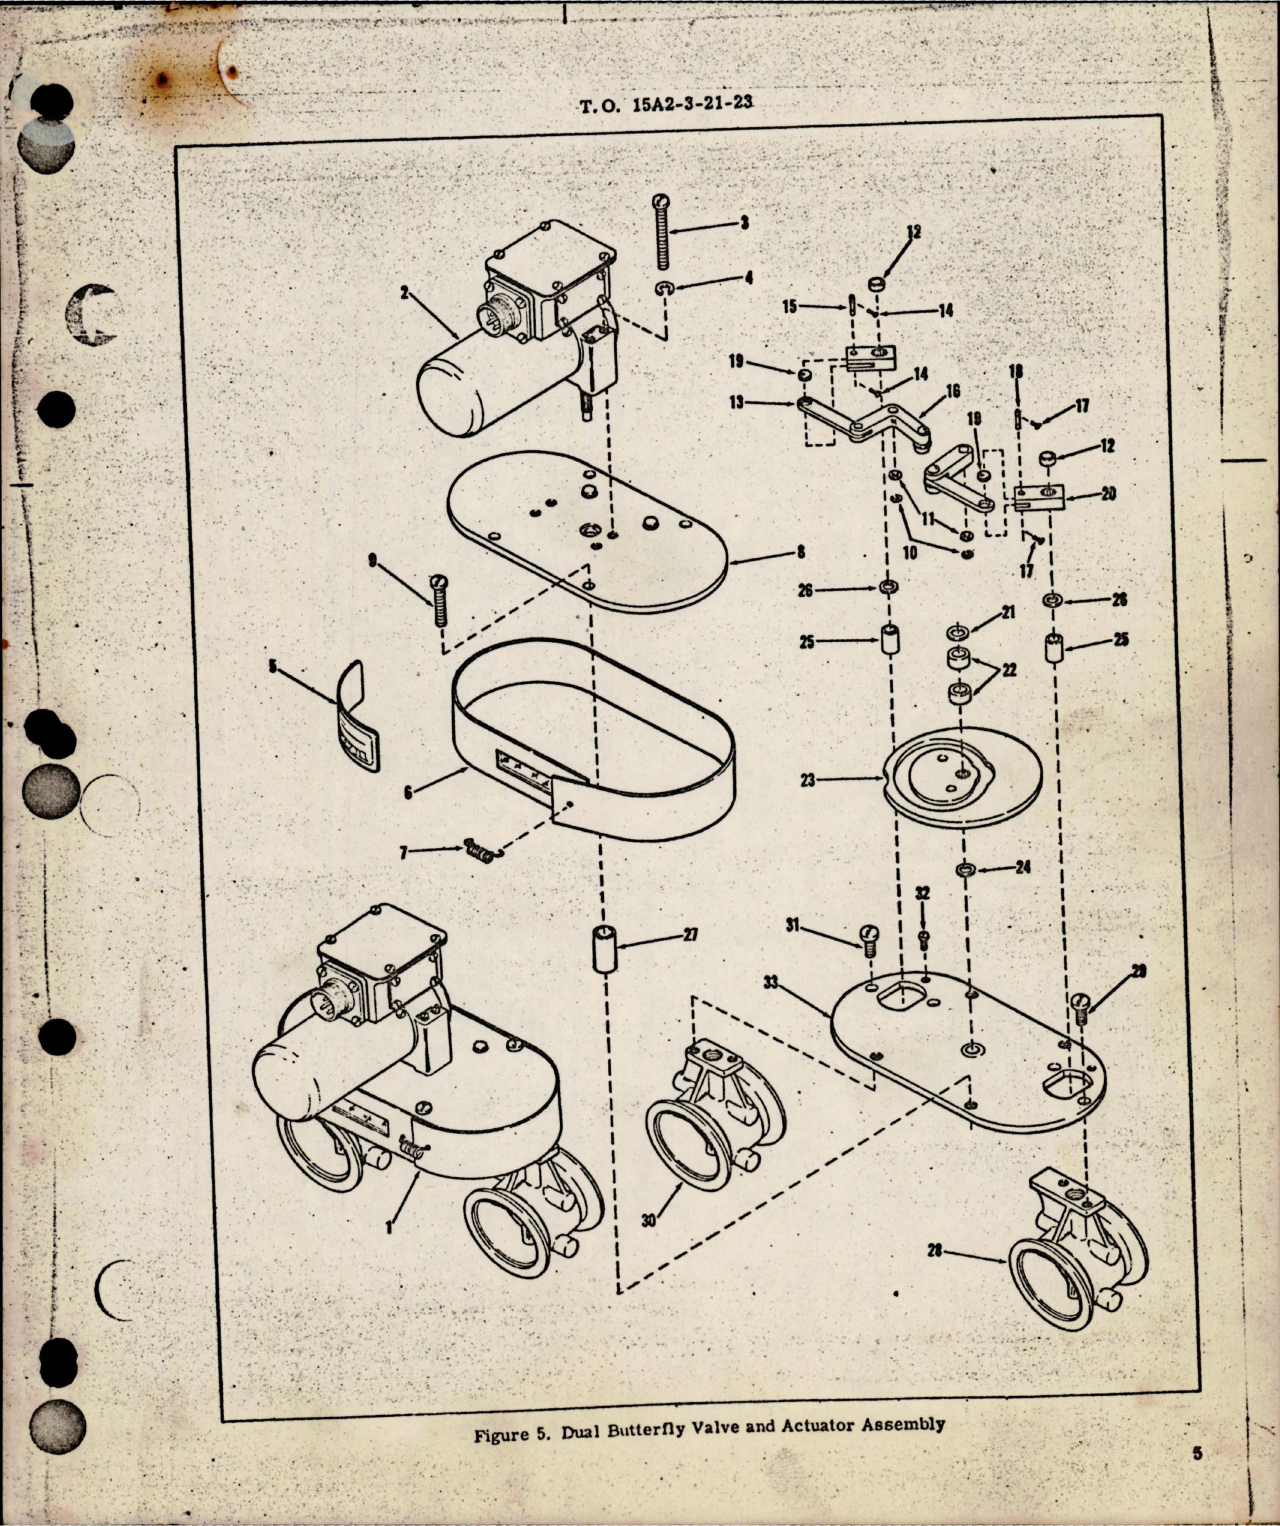 Sample page 5 from AirCorps Library document: Overhaul Instructions with Parts Breakdown for Dual Butterfly Valve and Actuator Assembly - Part DYLZ 3990-3